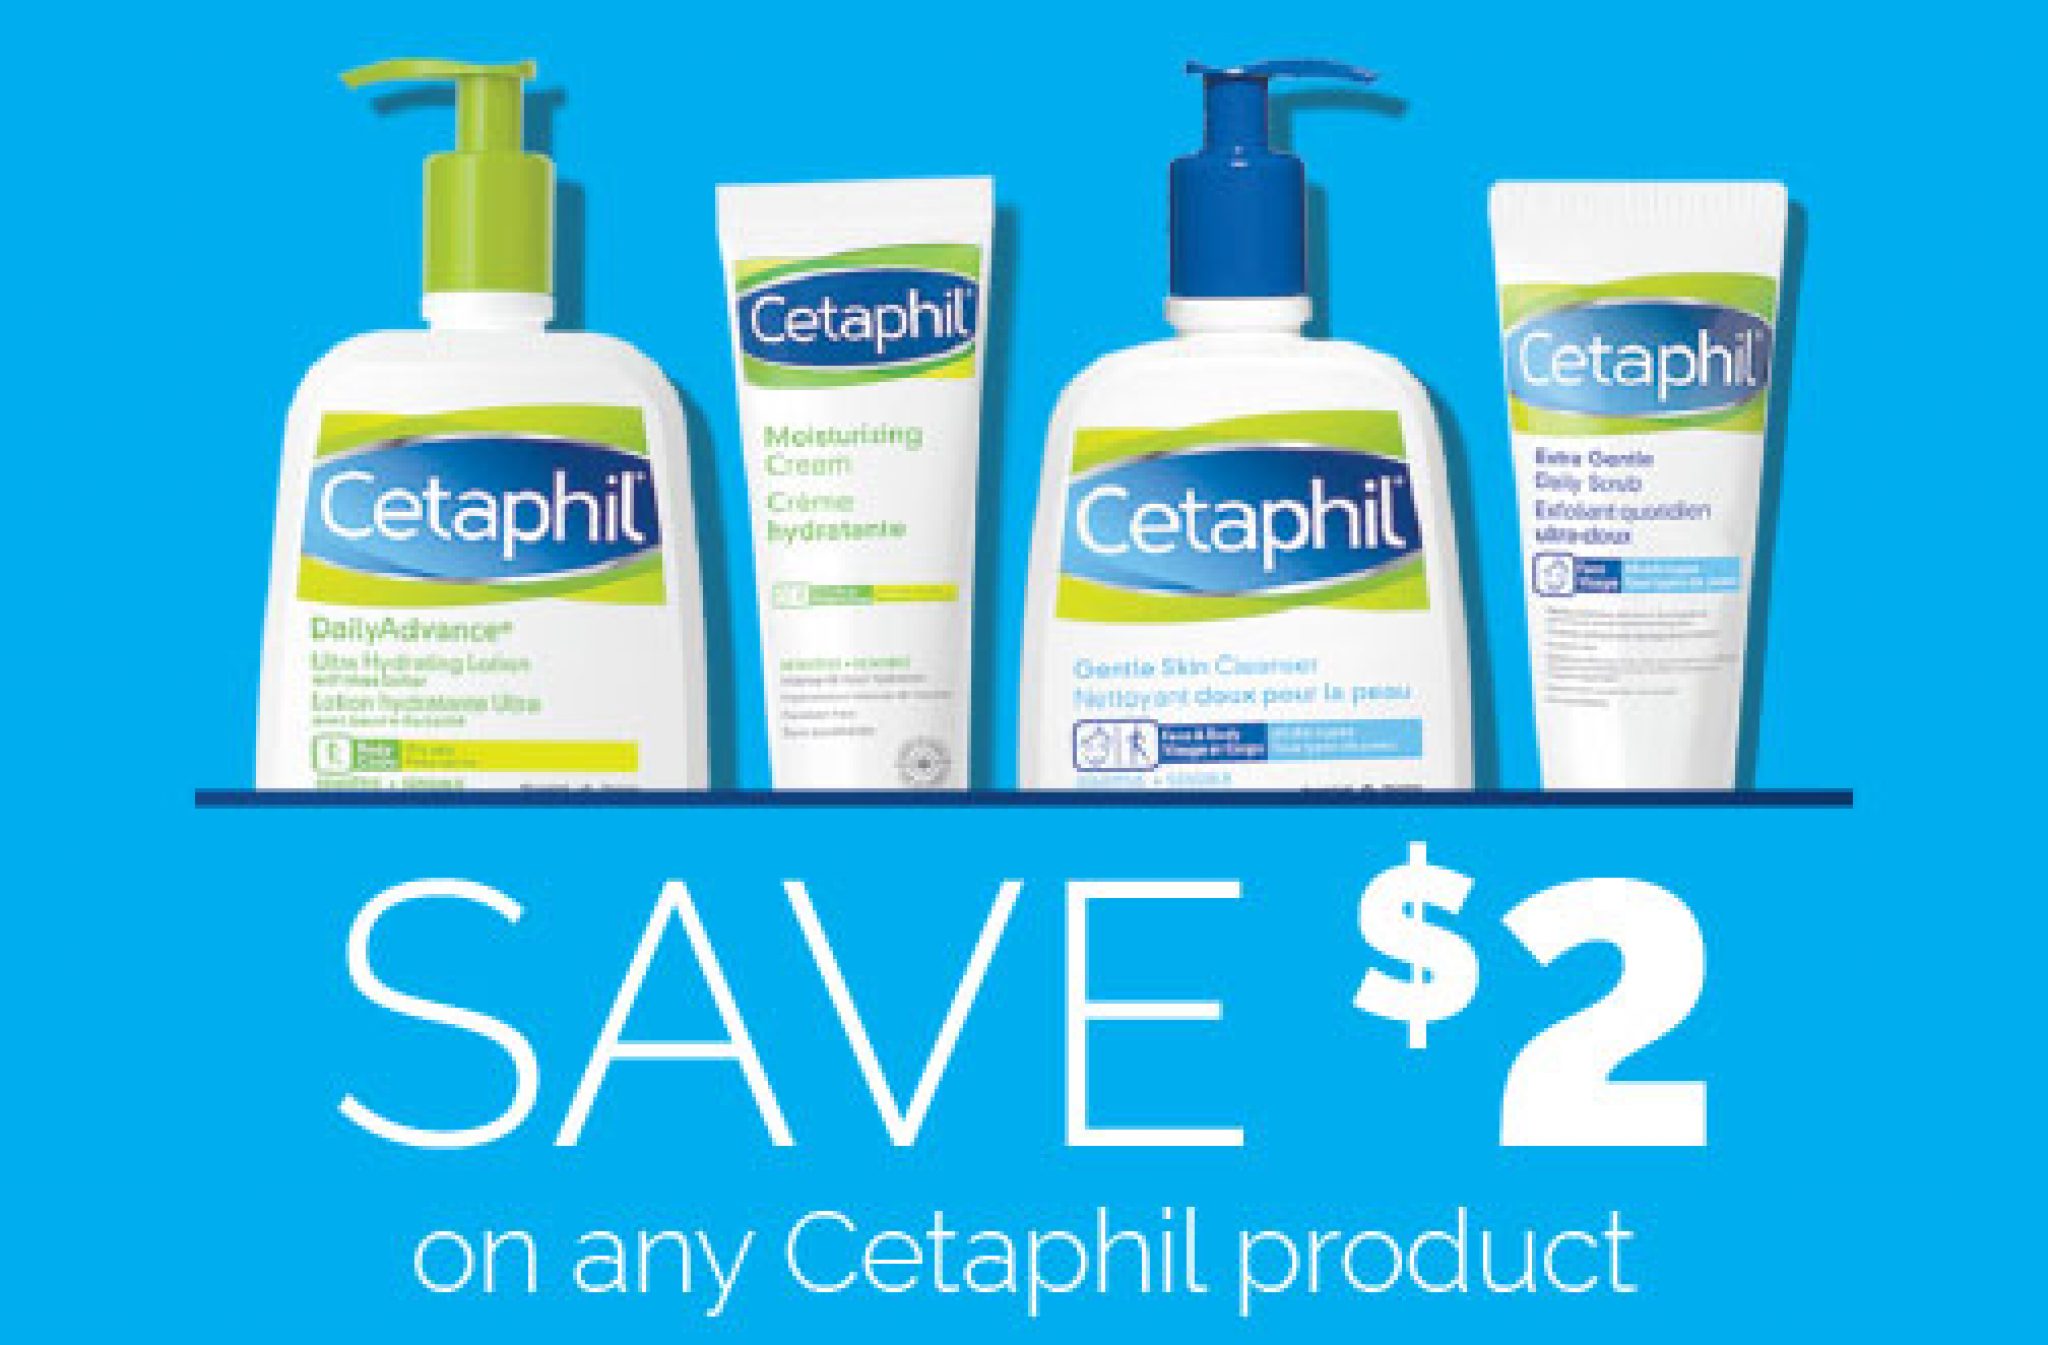 cetaphil-coupons-canada-save-2-off-cetaphil-products-deals-from